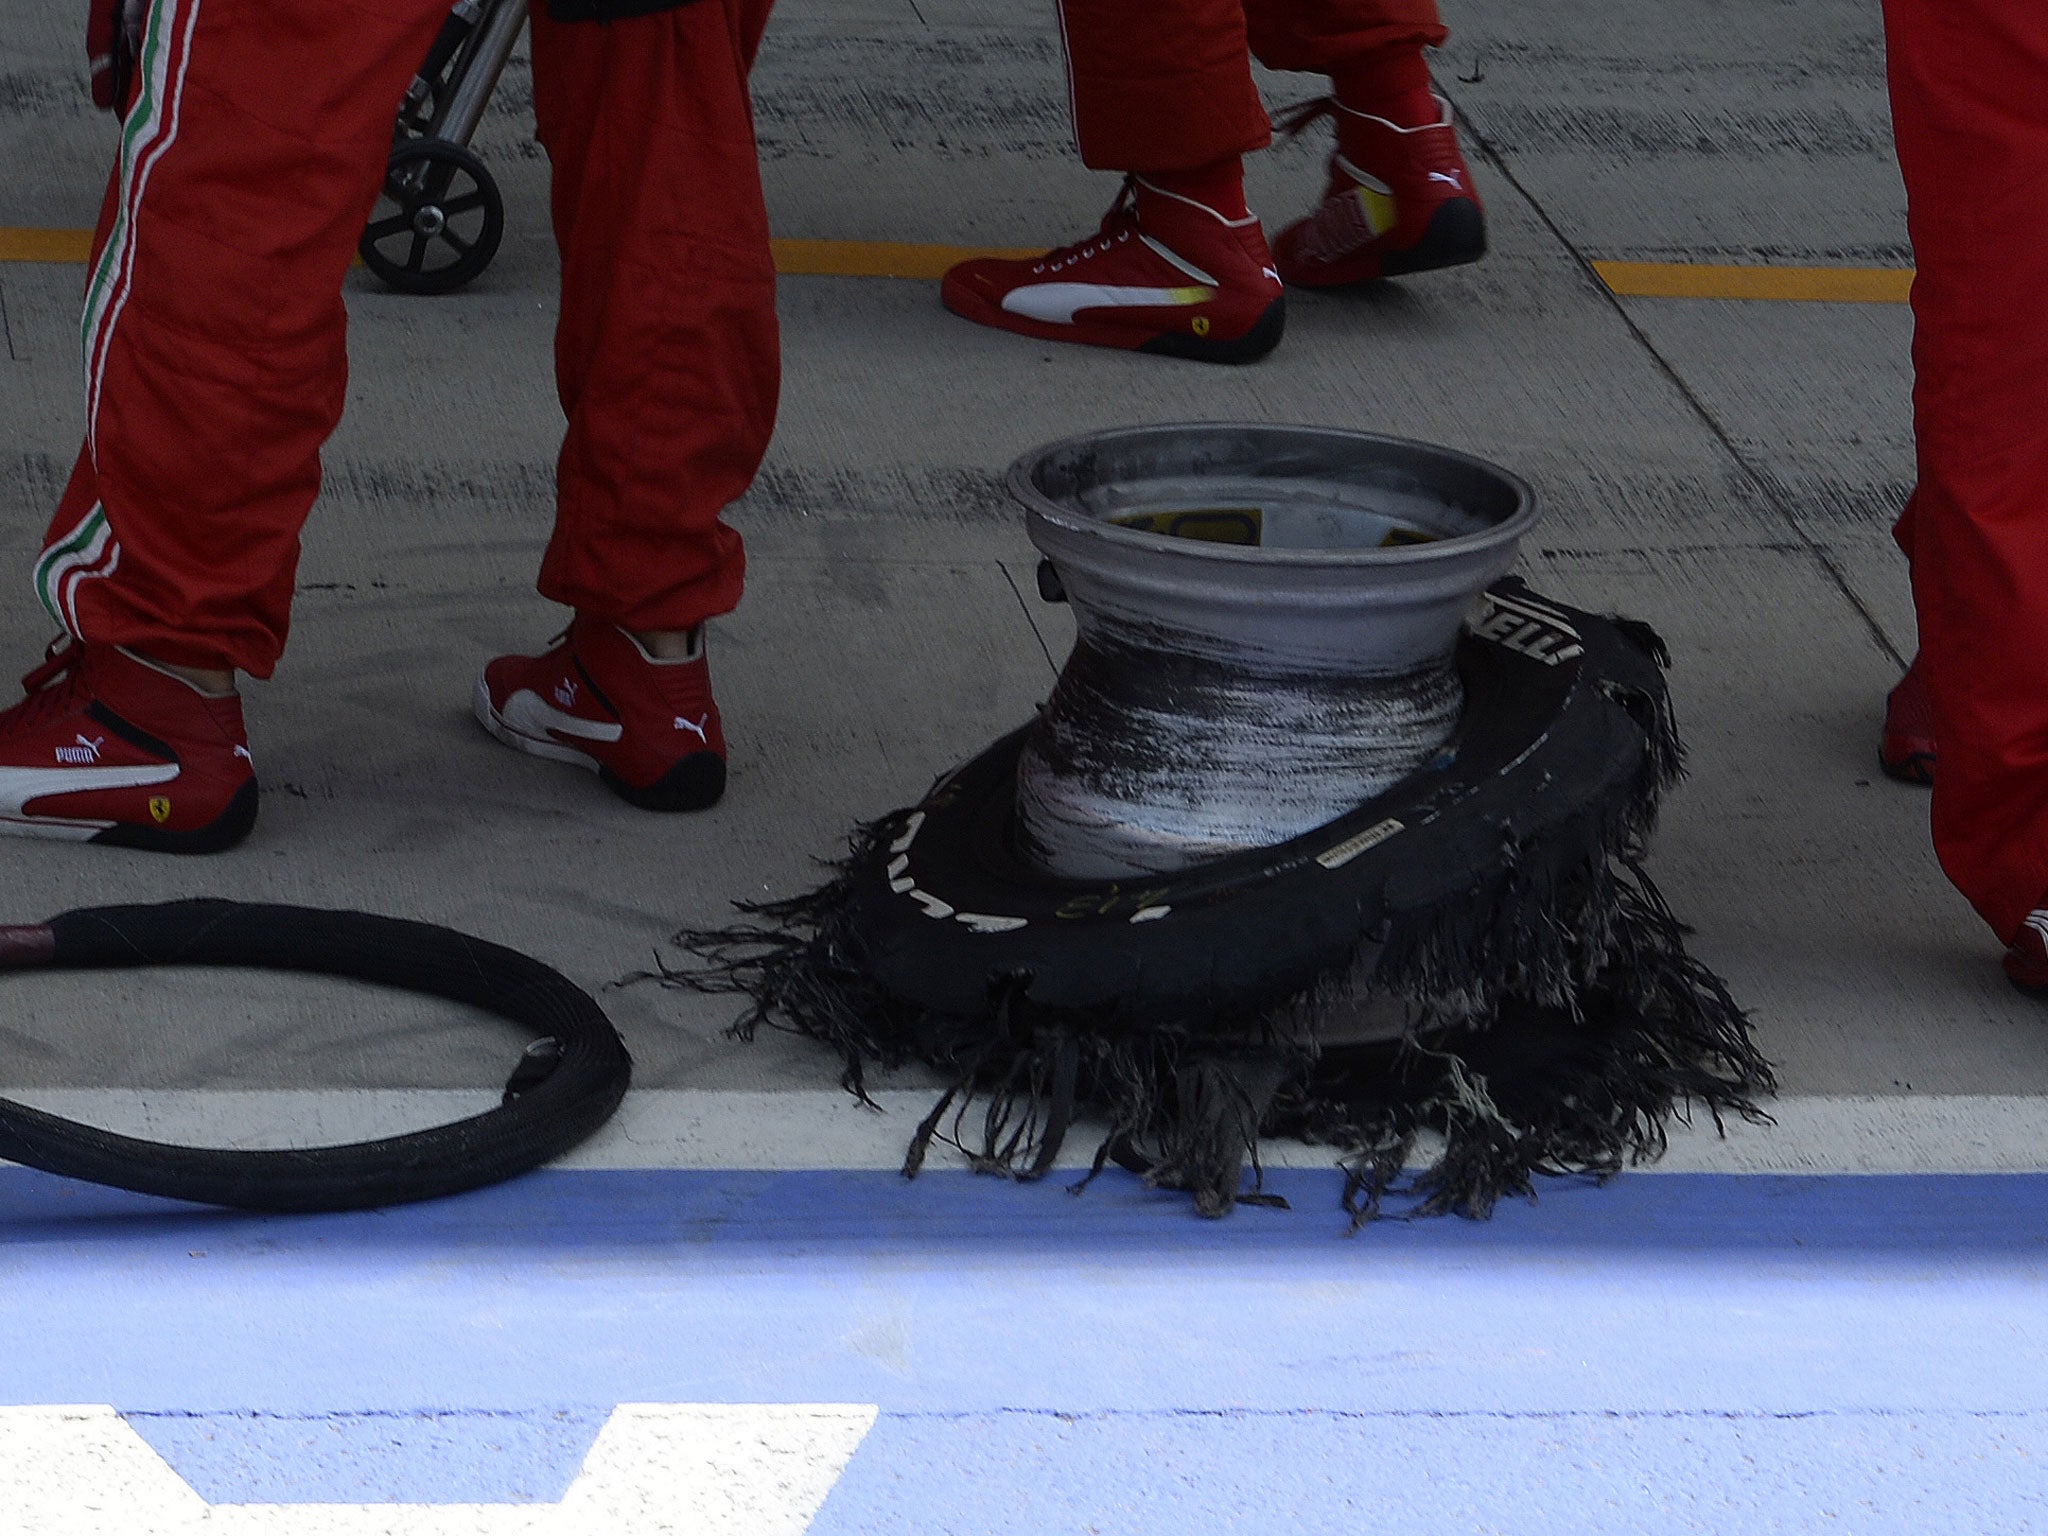 Pirelli said that the exploding tyres were ‘unforeseen’